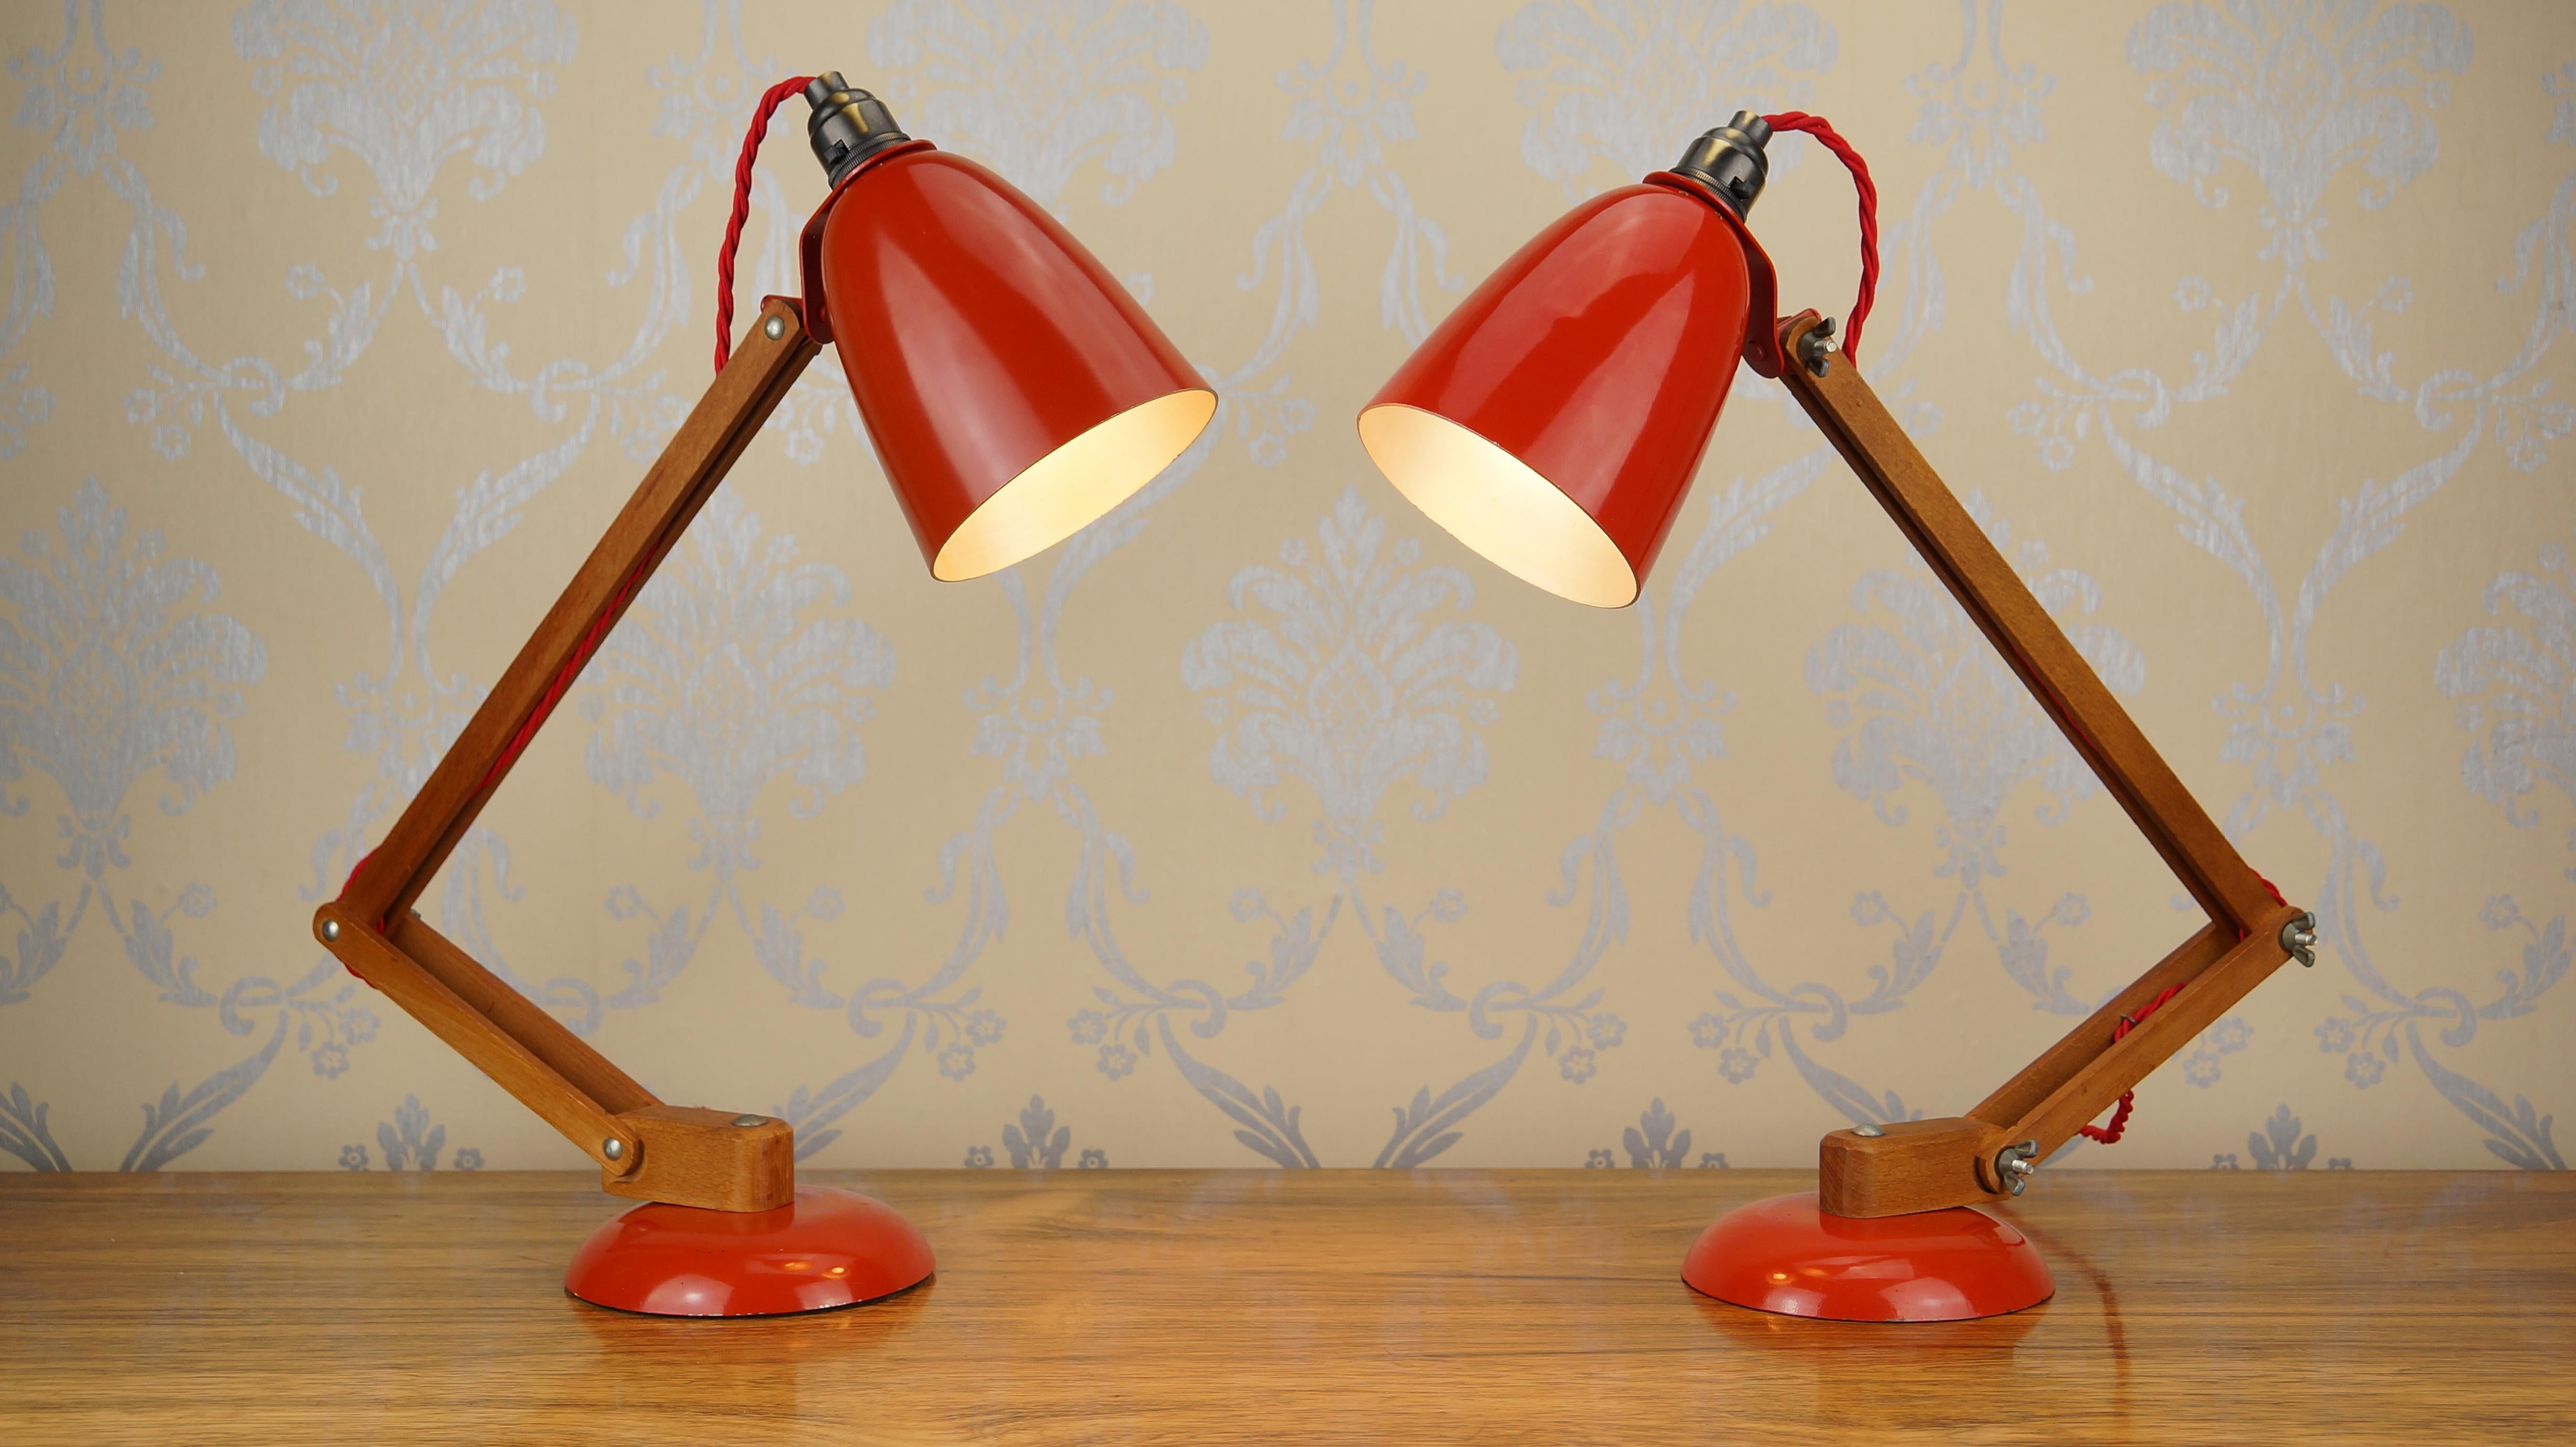 Pair of vintage midcentury Wood Maclamps.
Designed by Terence Conran for Habitat in the late 1950s.

These colorful lamps are in great condition having been completely dismantled to give them a sympathetic revival. The wooden arms have been